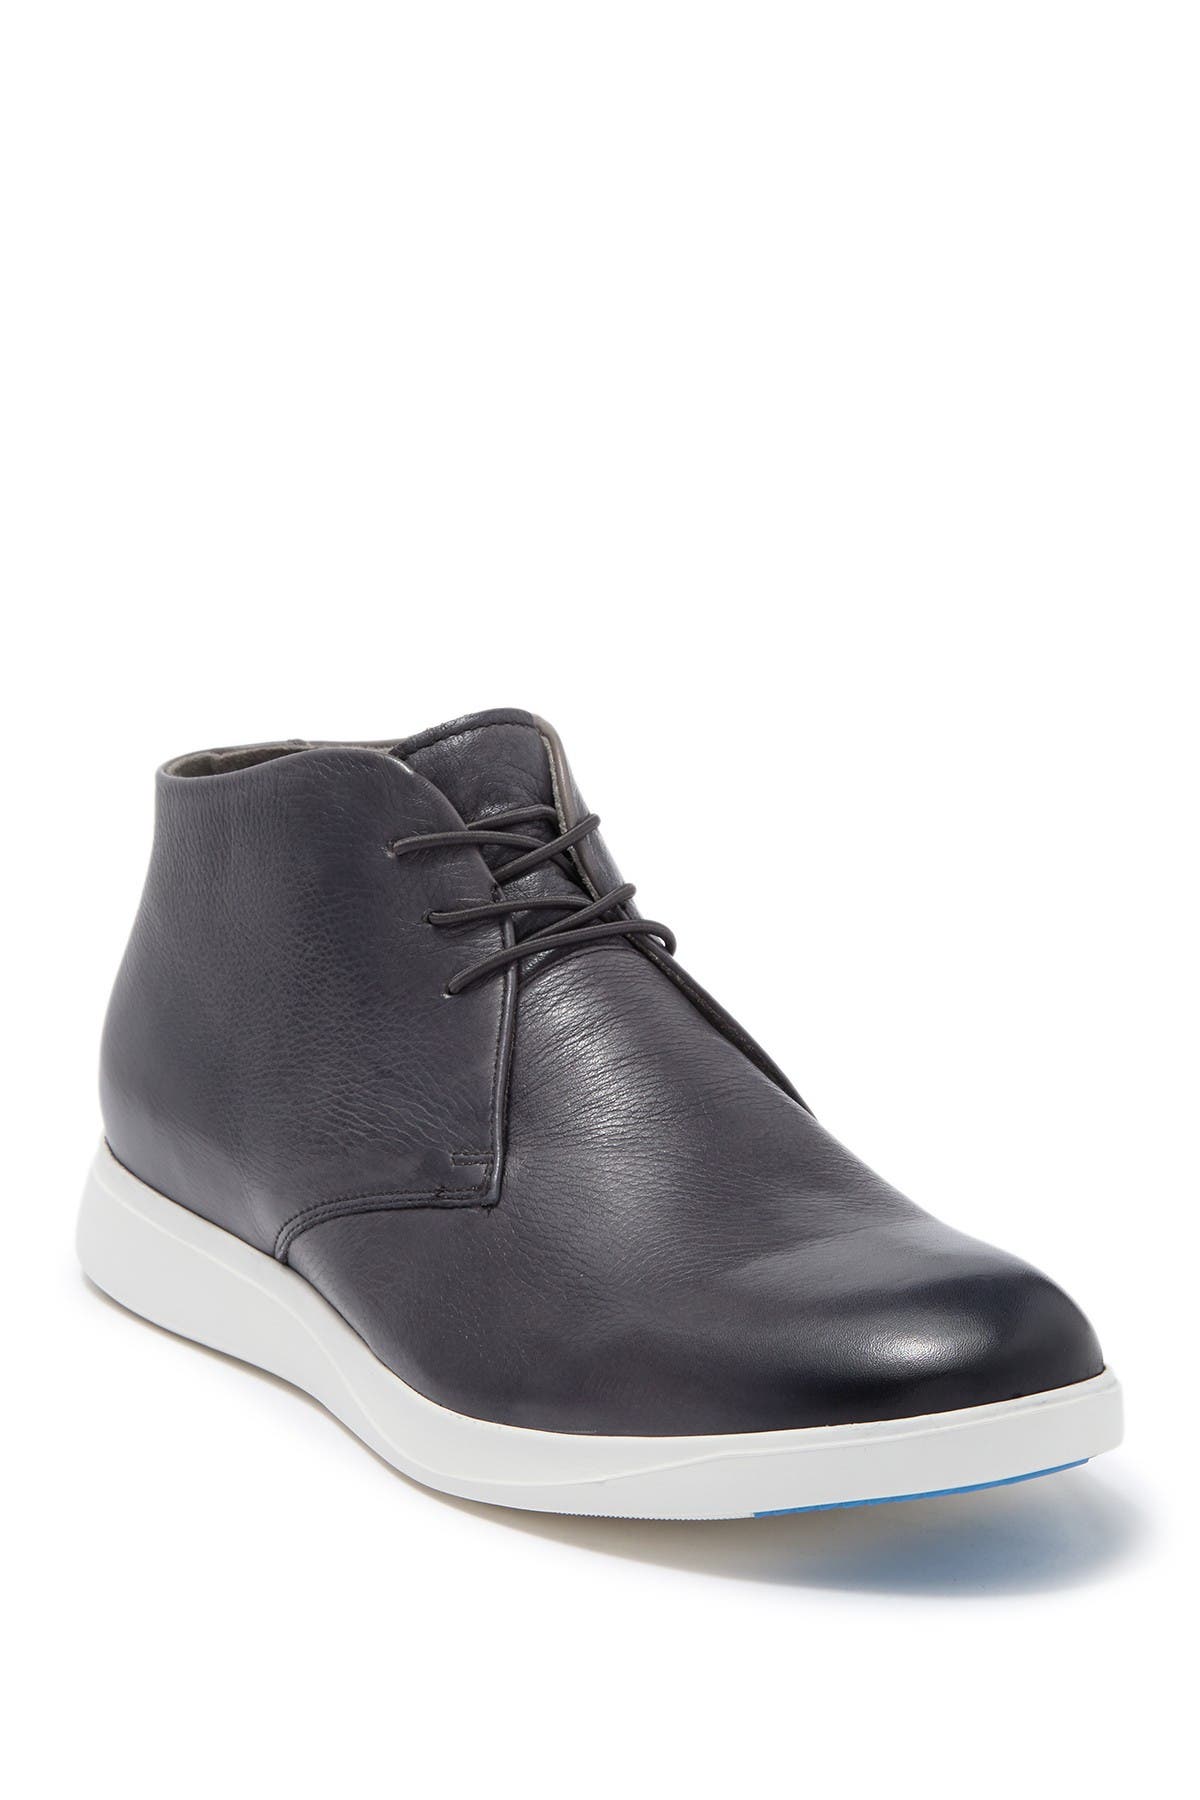 kenneth cole dress sneakers